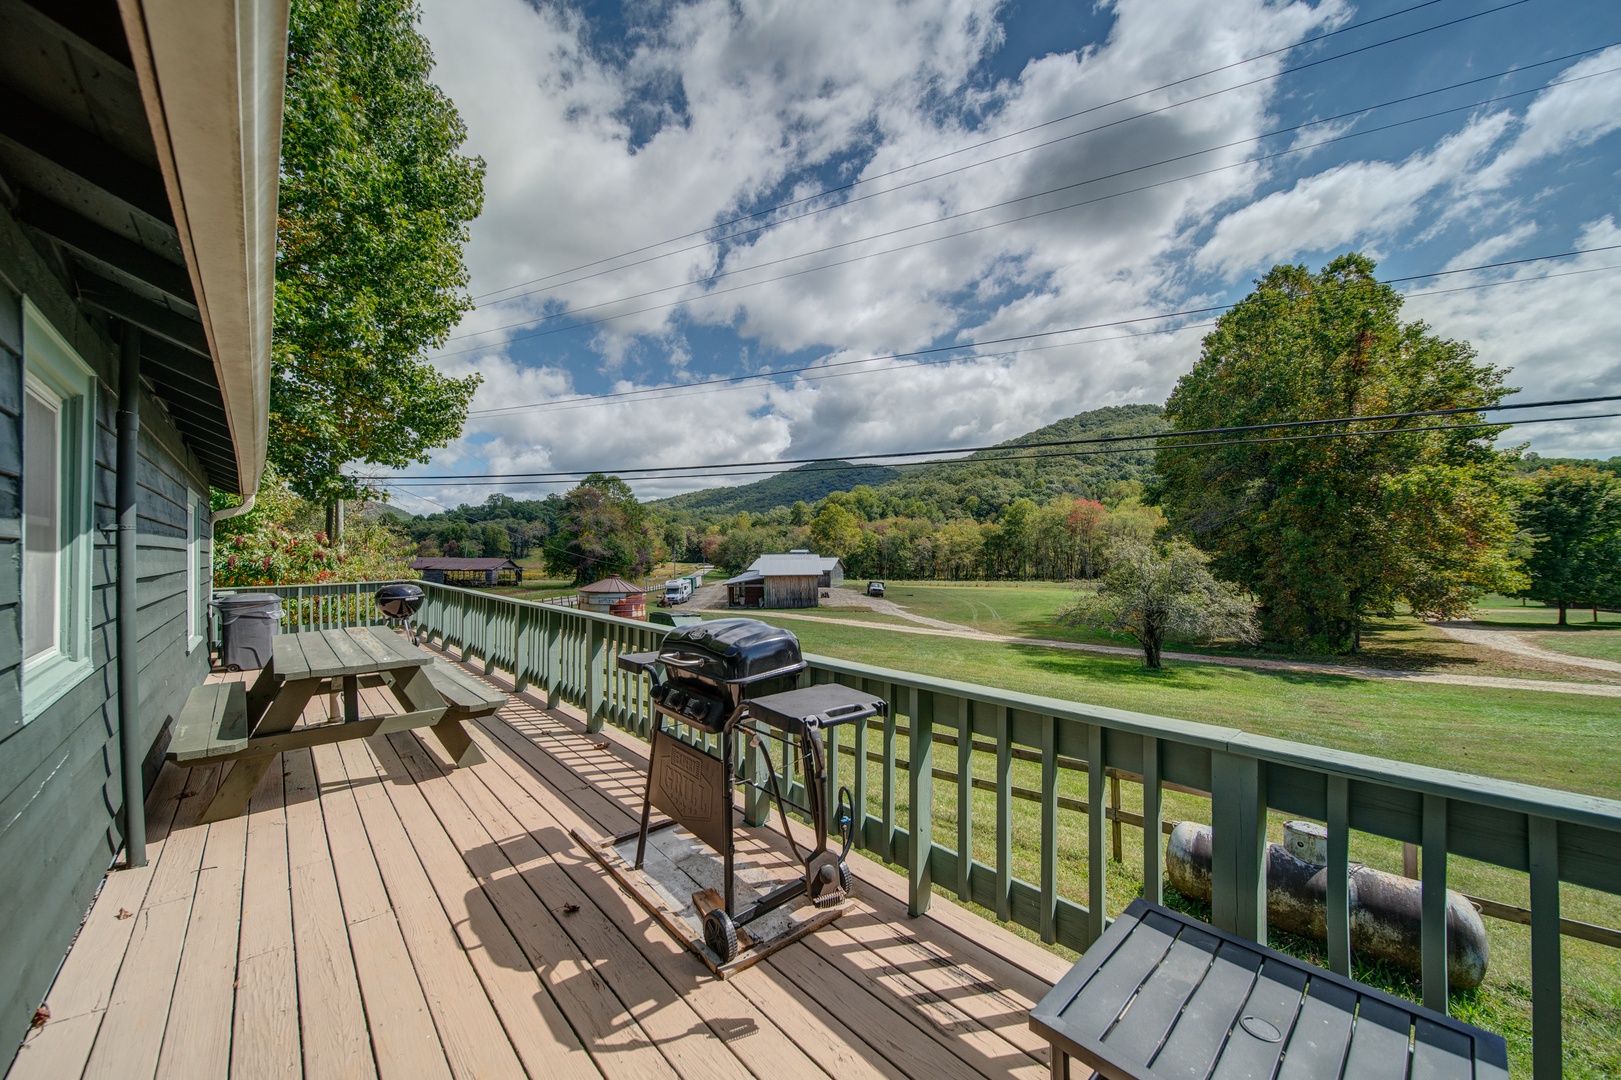 Lounge in the sunshine & relax on the back deck while you grill up a feast!